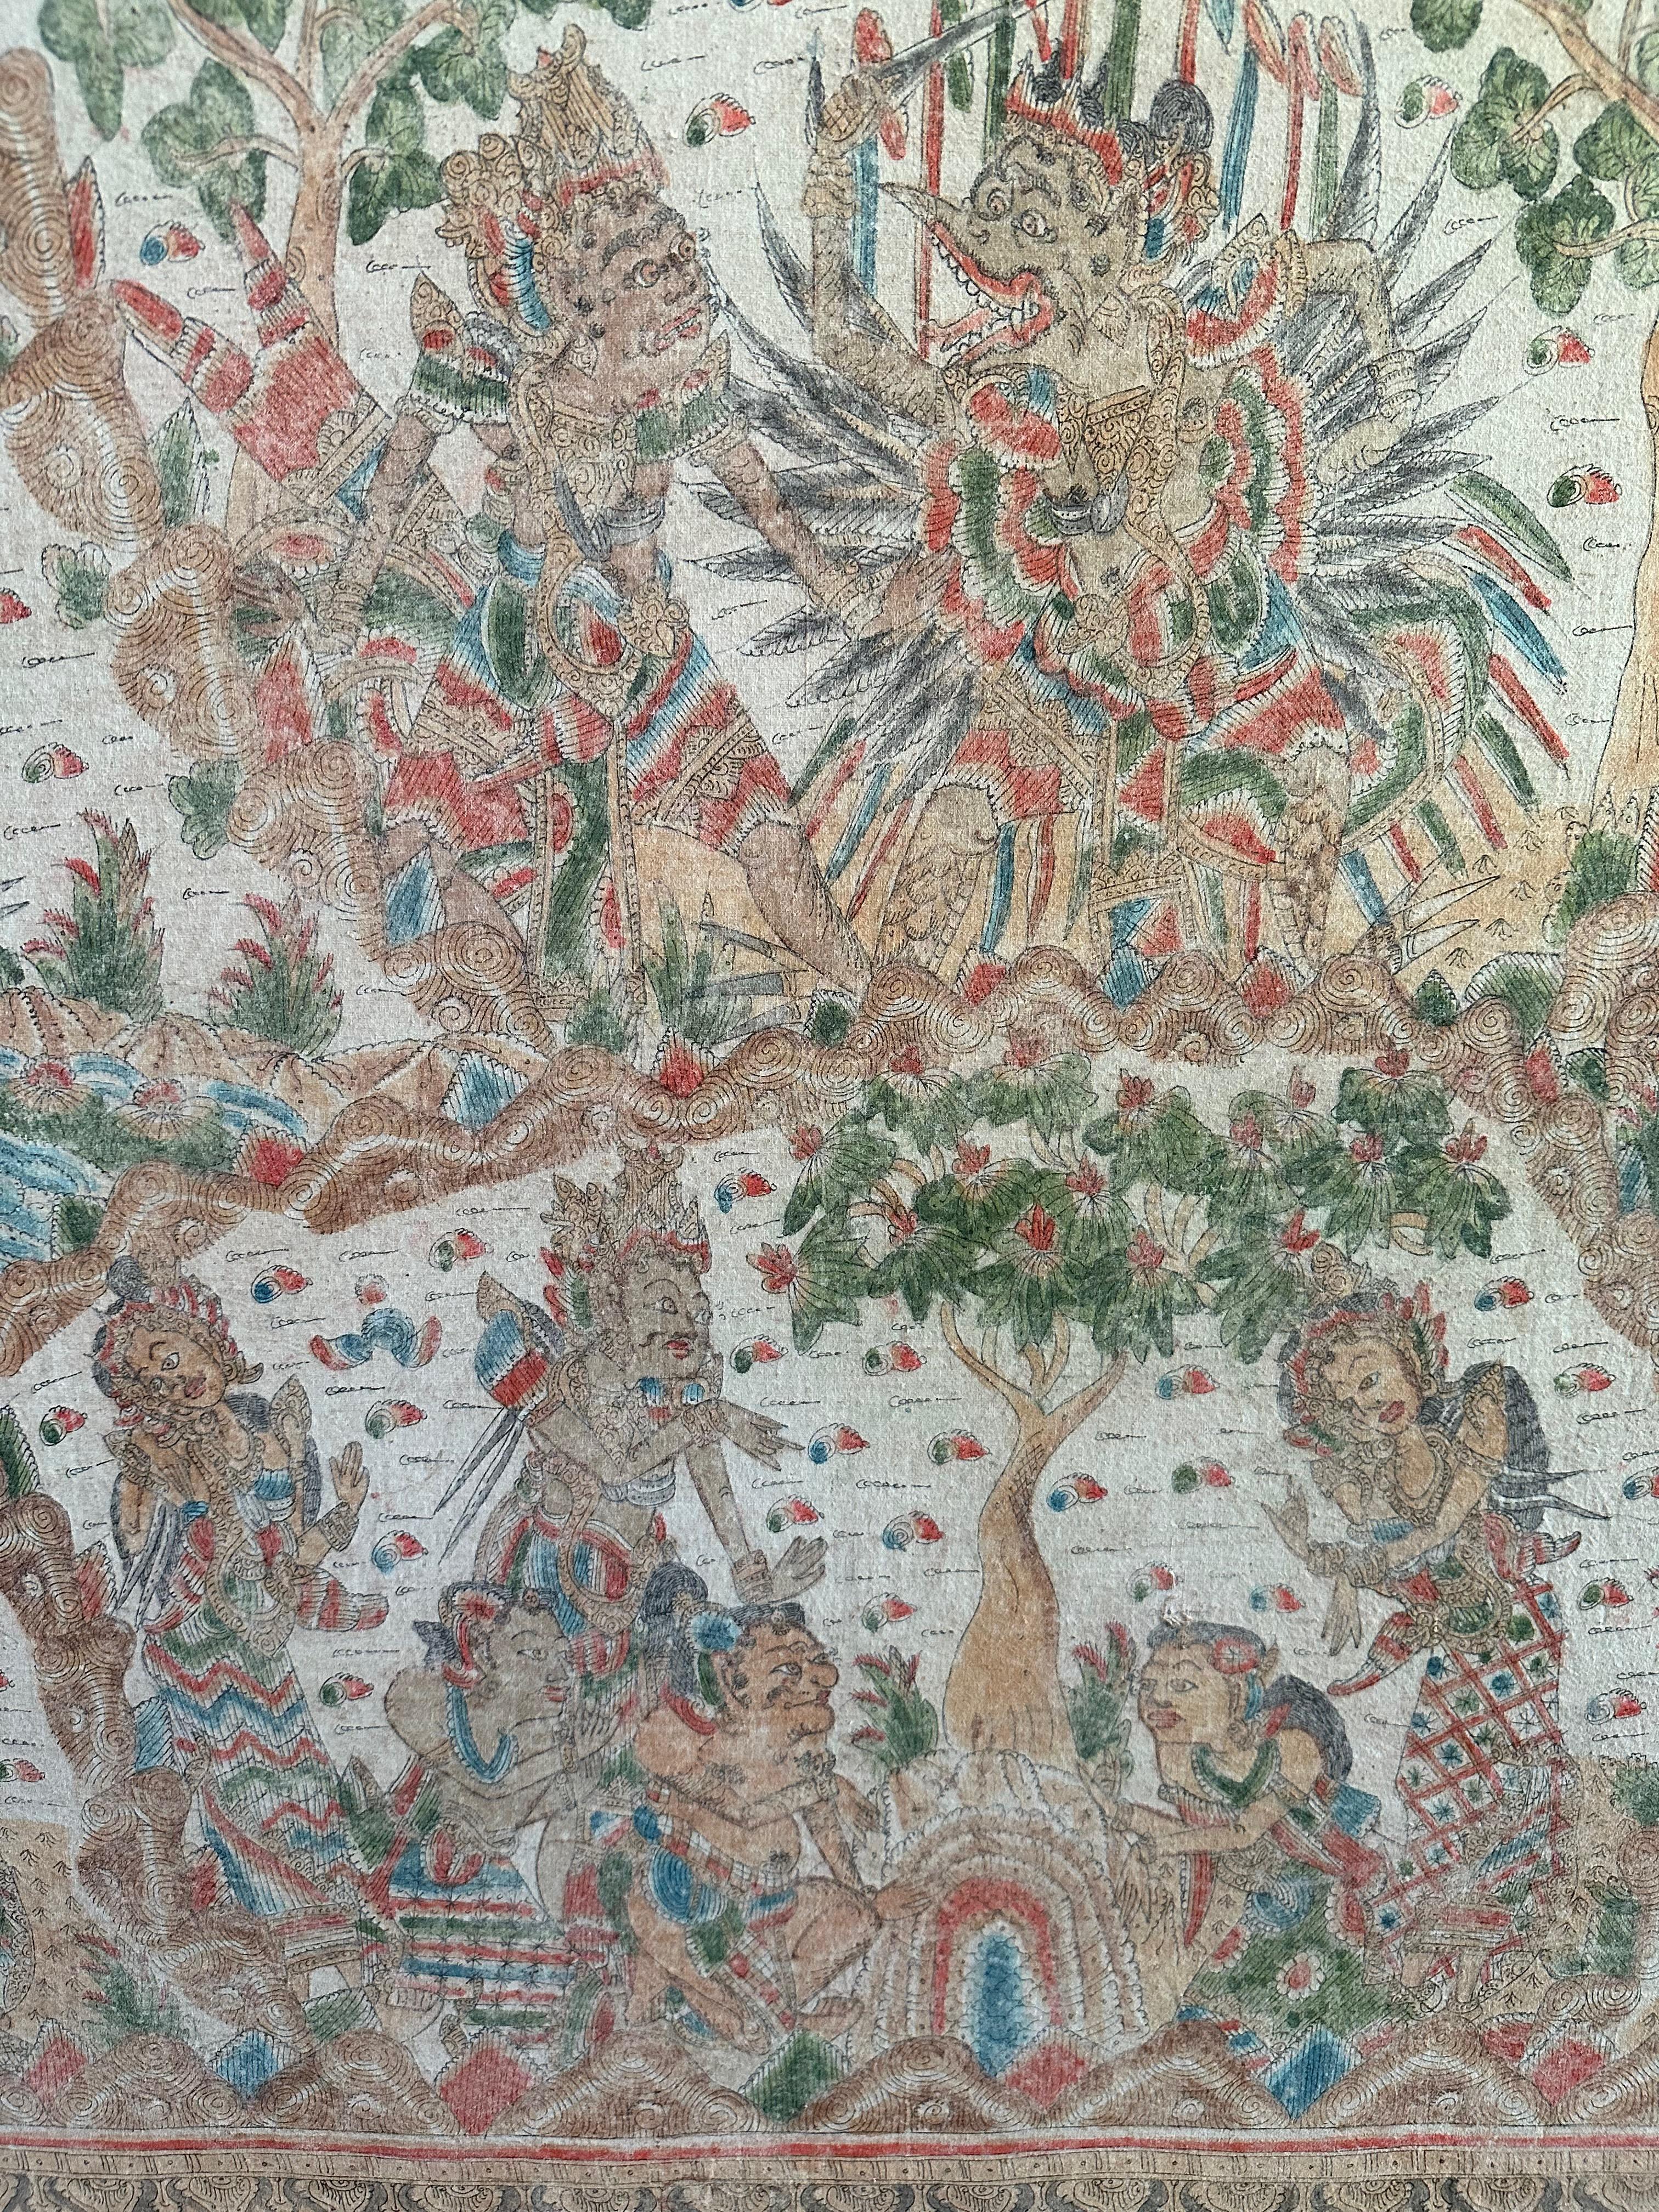 A Mid-20th Century 'Kamasan' cotton textile painting from Bali, Indonesia. The hand painted image has great detail and depicts Balinese Hindu mythology. This textile painting is stretched over a canvas, bordered by a teak wood frame and is ready to